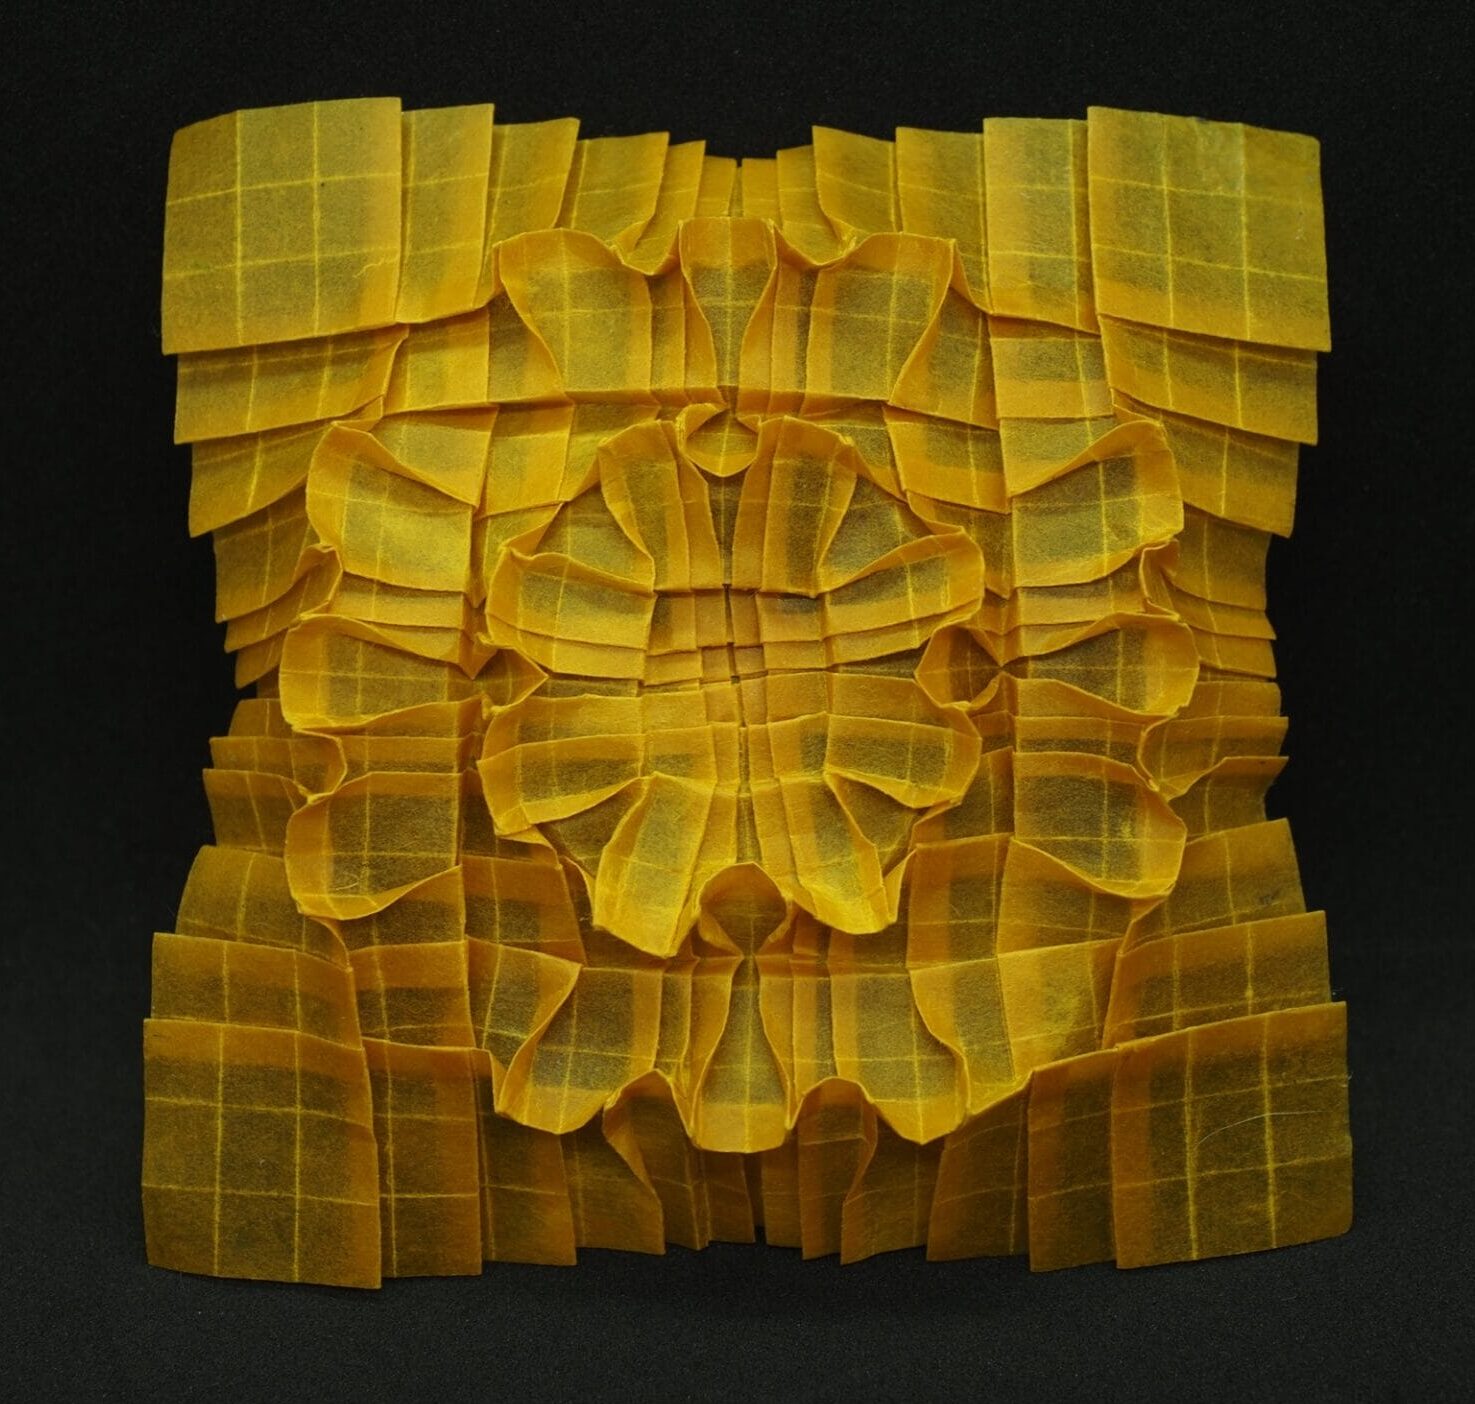 Remarkable Tessellated Forms Emerge in Intricate Origami by Goran Konjevod